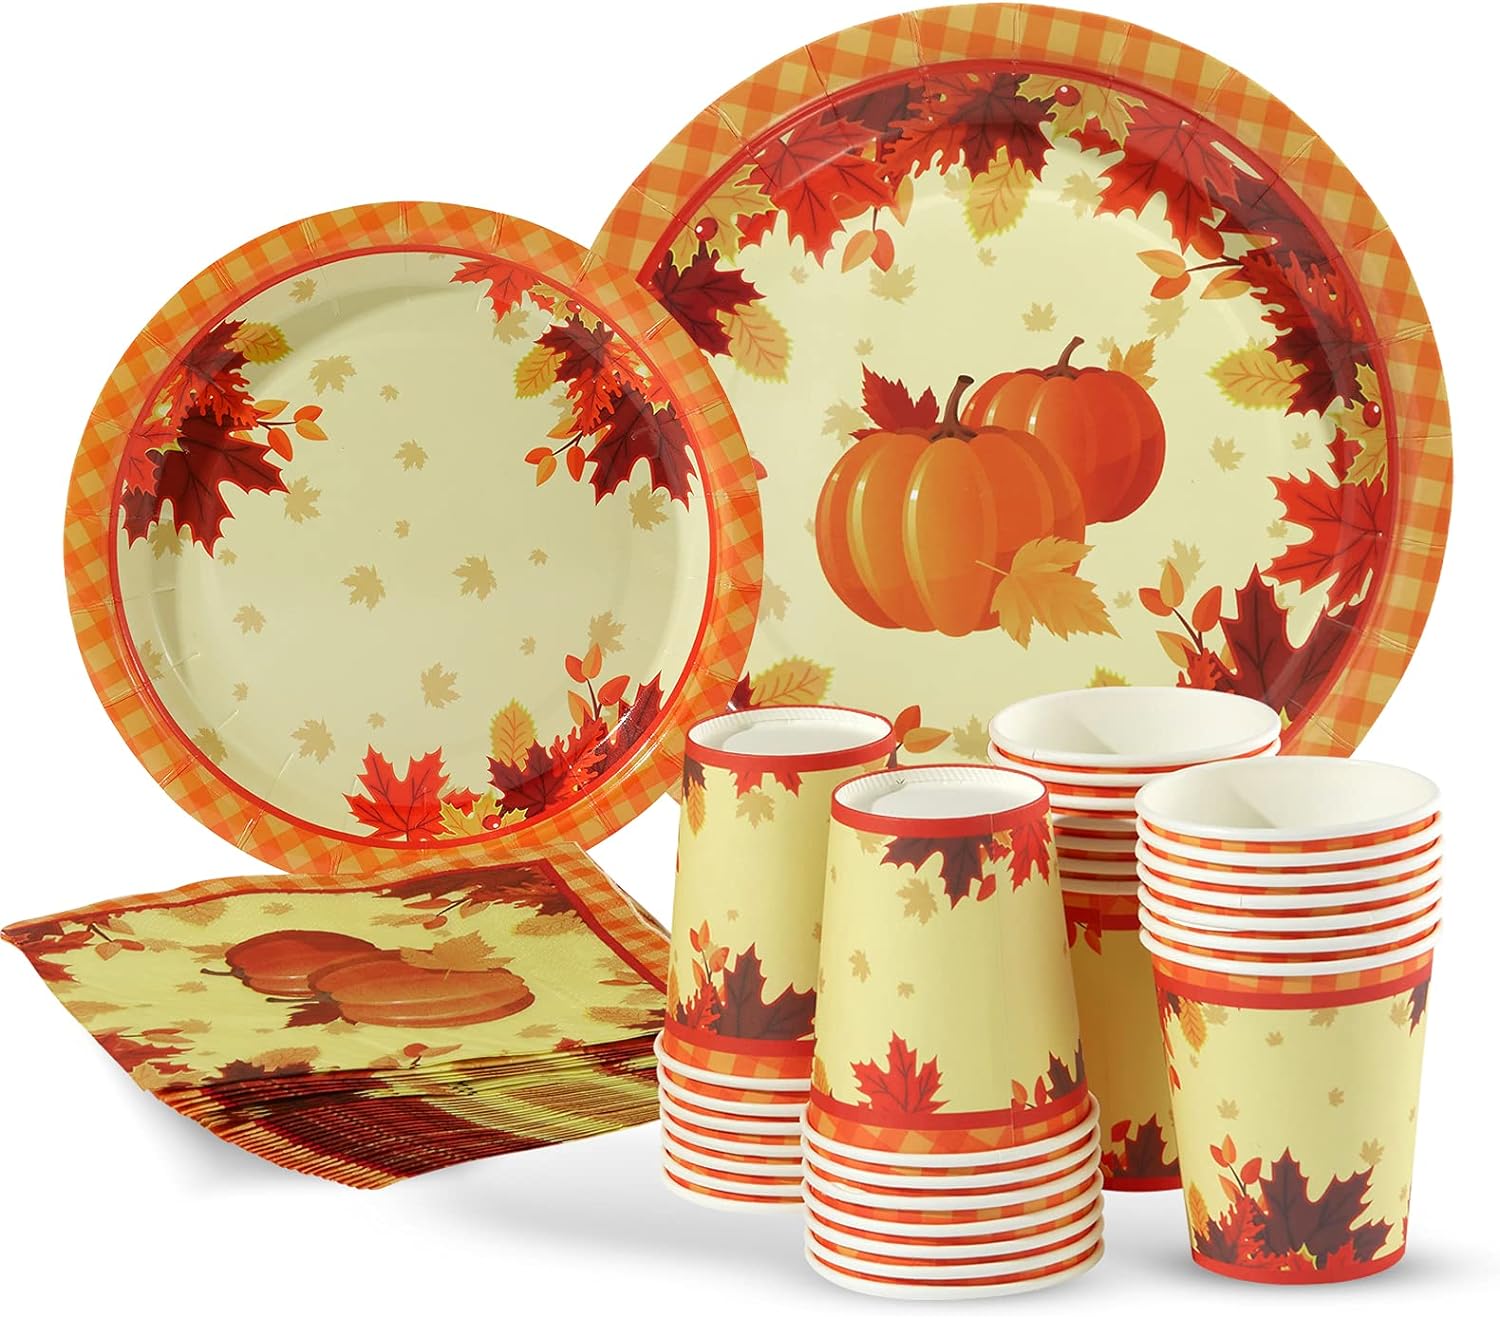 Fall Leaves Plates Napkins and Cups Set